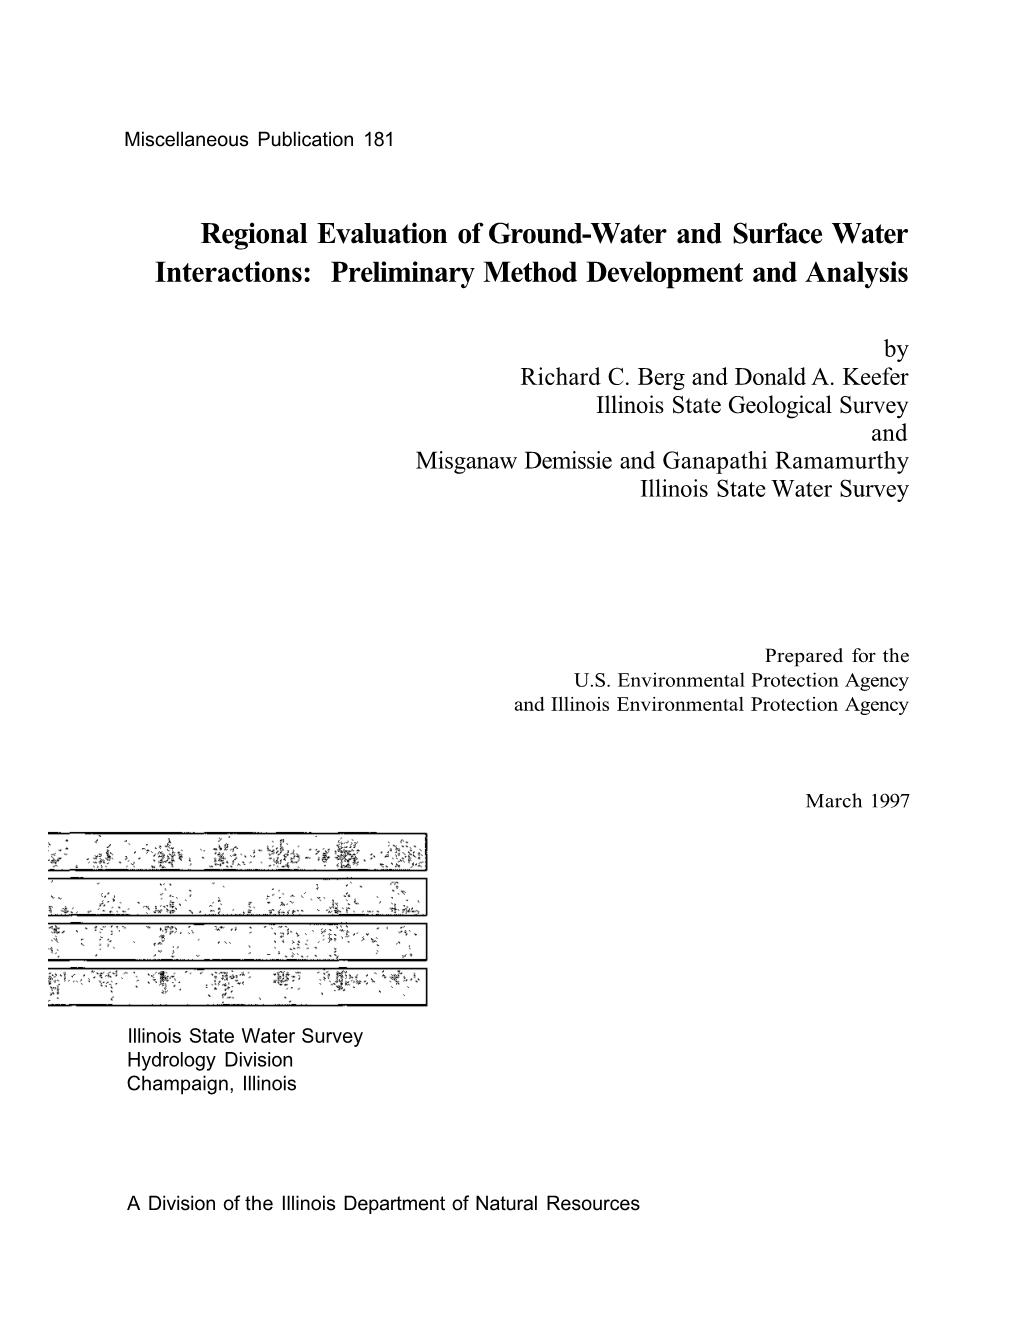 Regional Evaluation of Ground-Water and Surface Water Interactions: Preliminary Method Development and Analysis